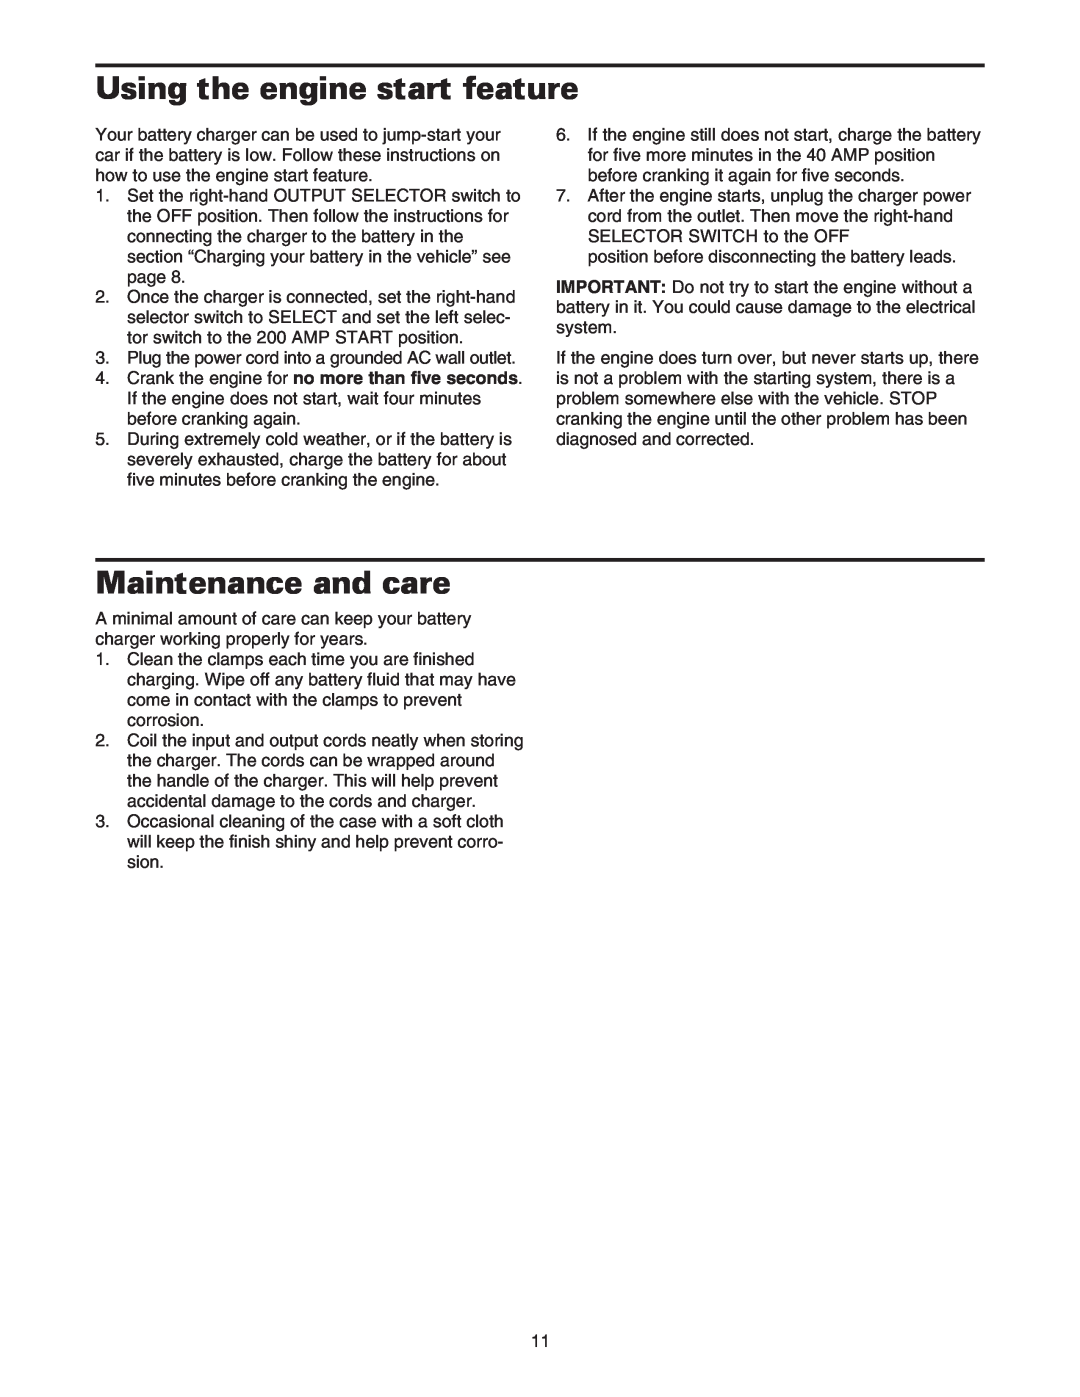 Sears 200.71231 owner manual Using the engine start feature, Maintenance and care 